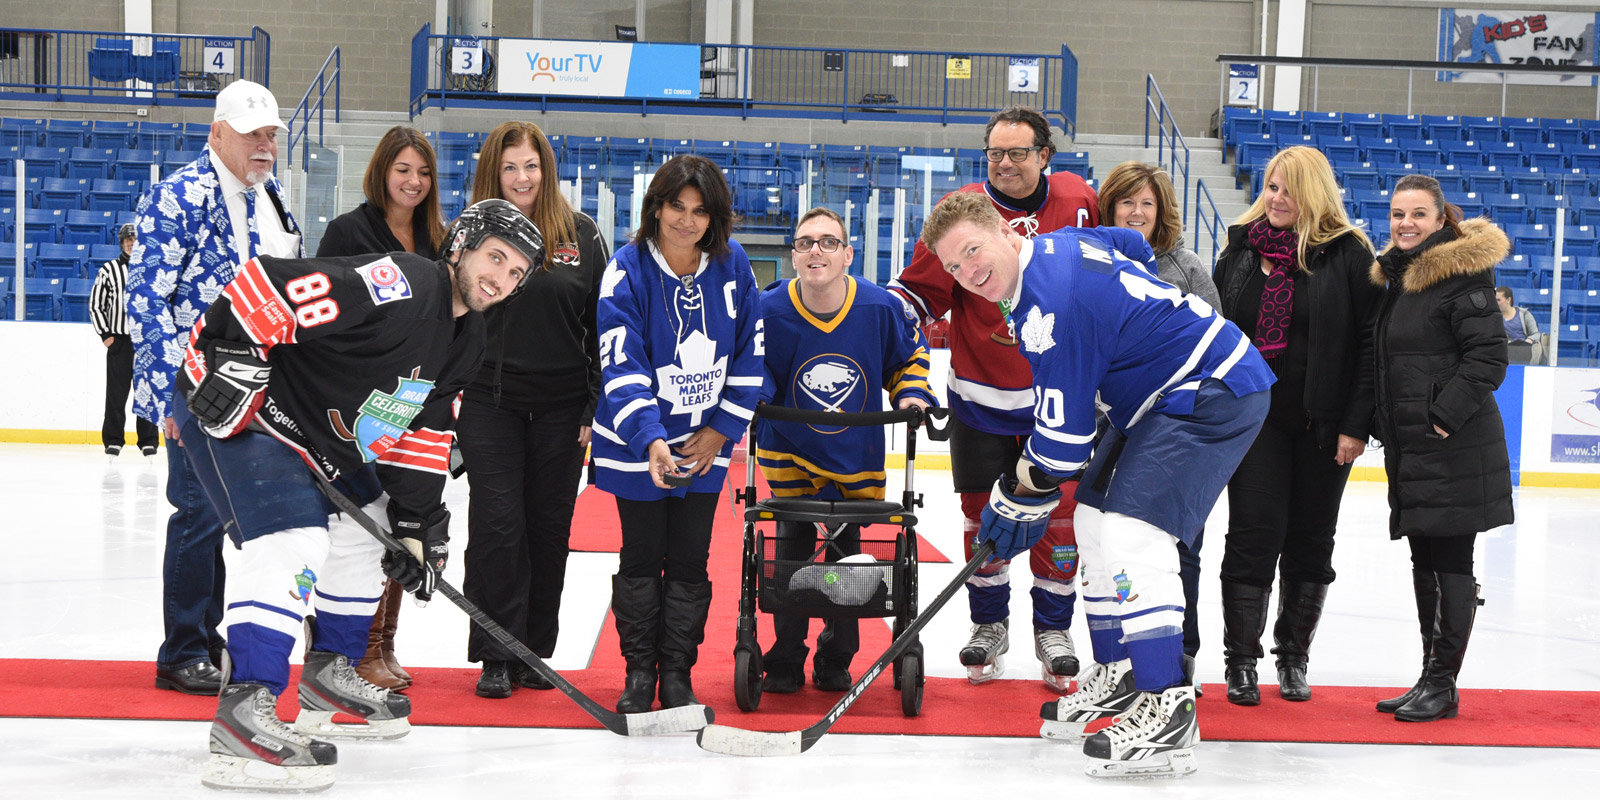 Brad May does the ceremonial puck drop with one of the players